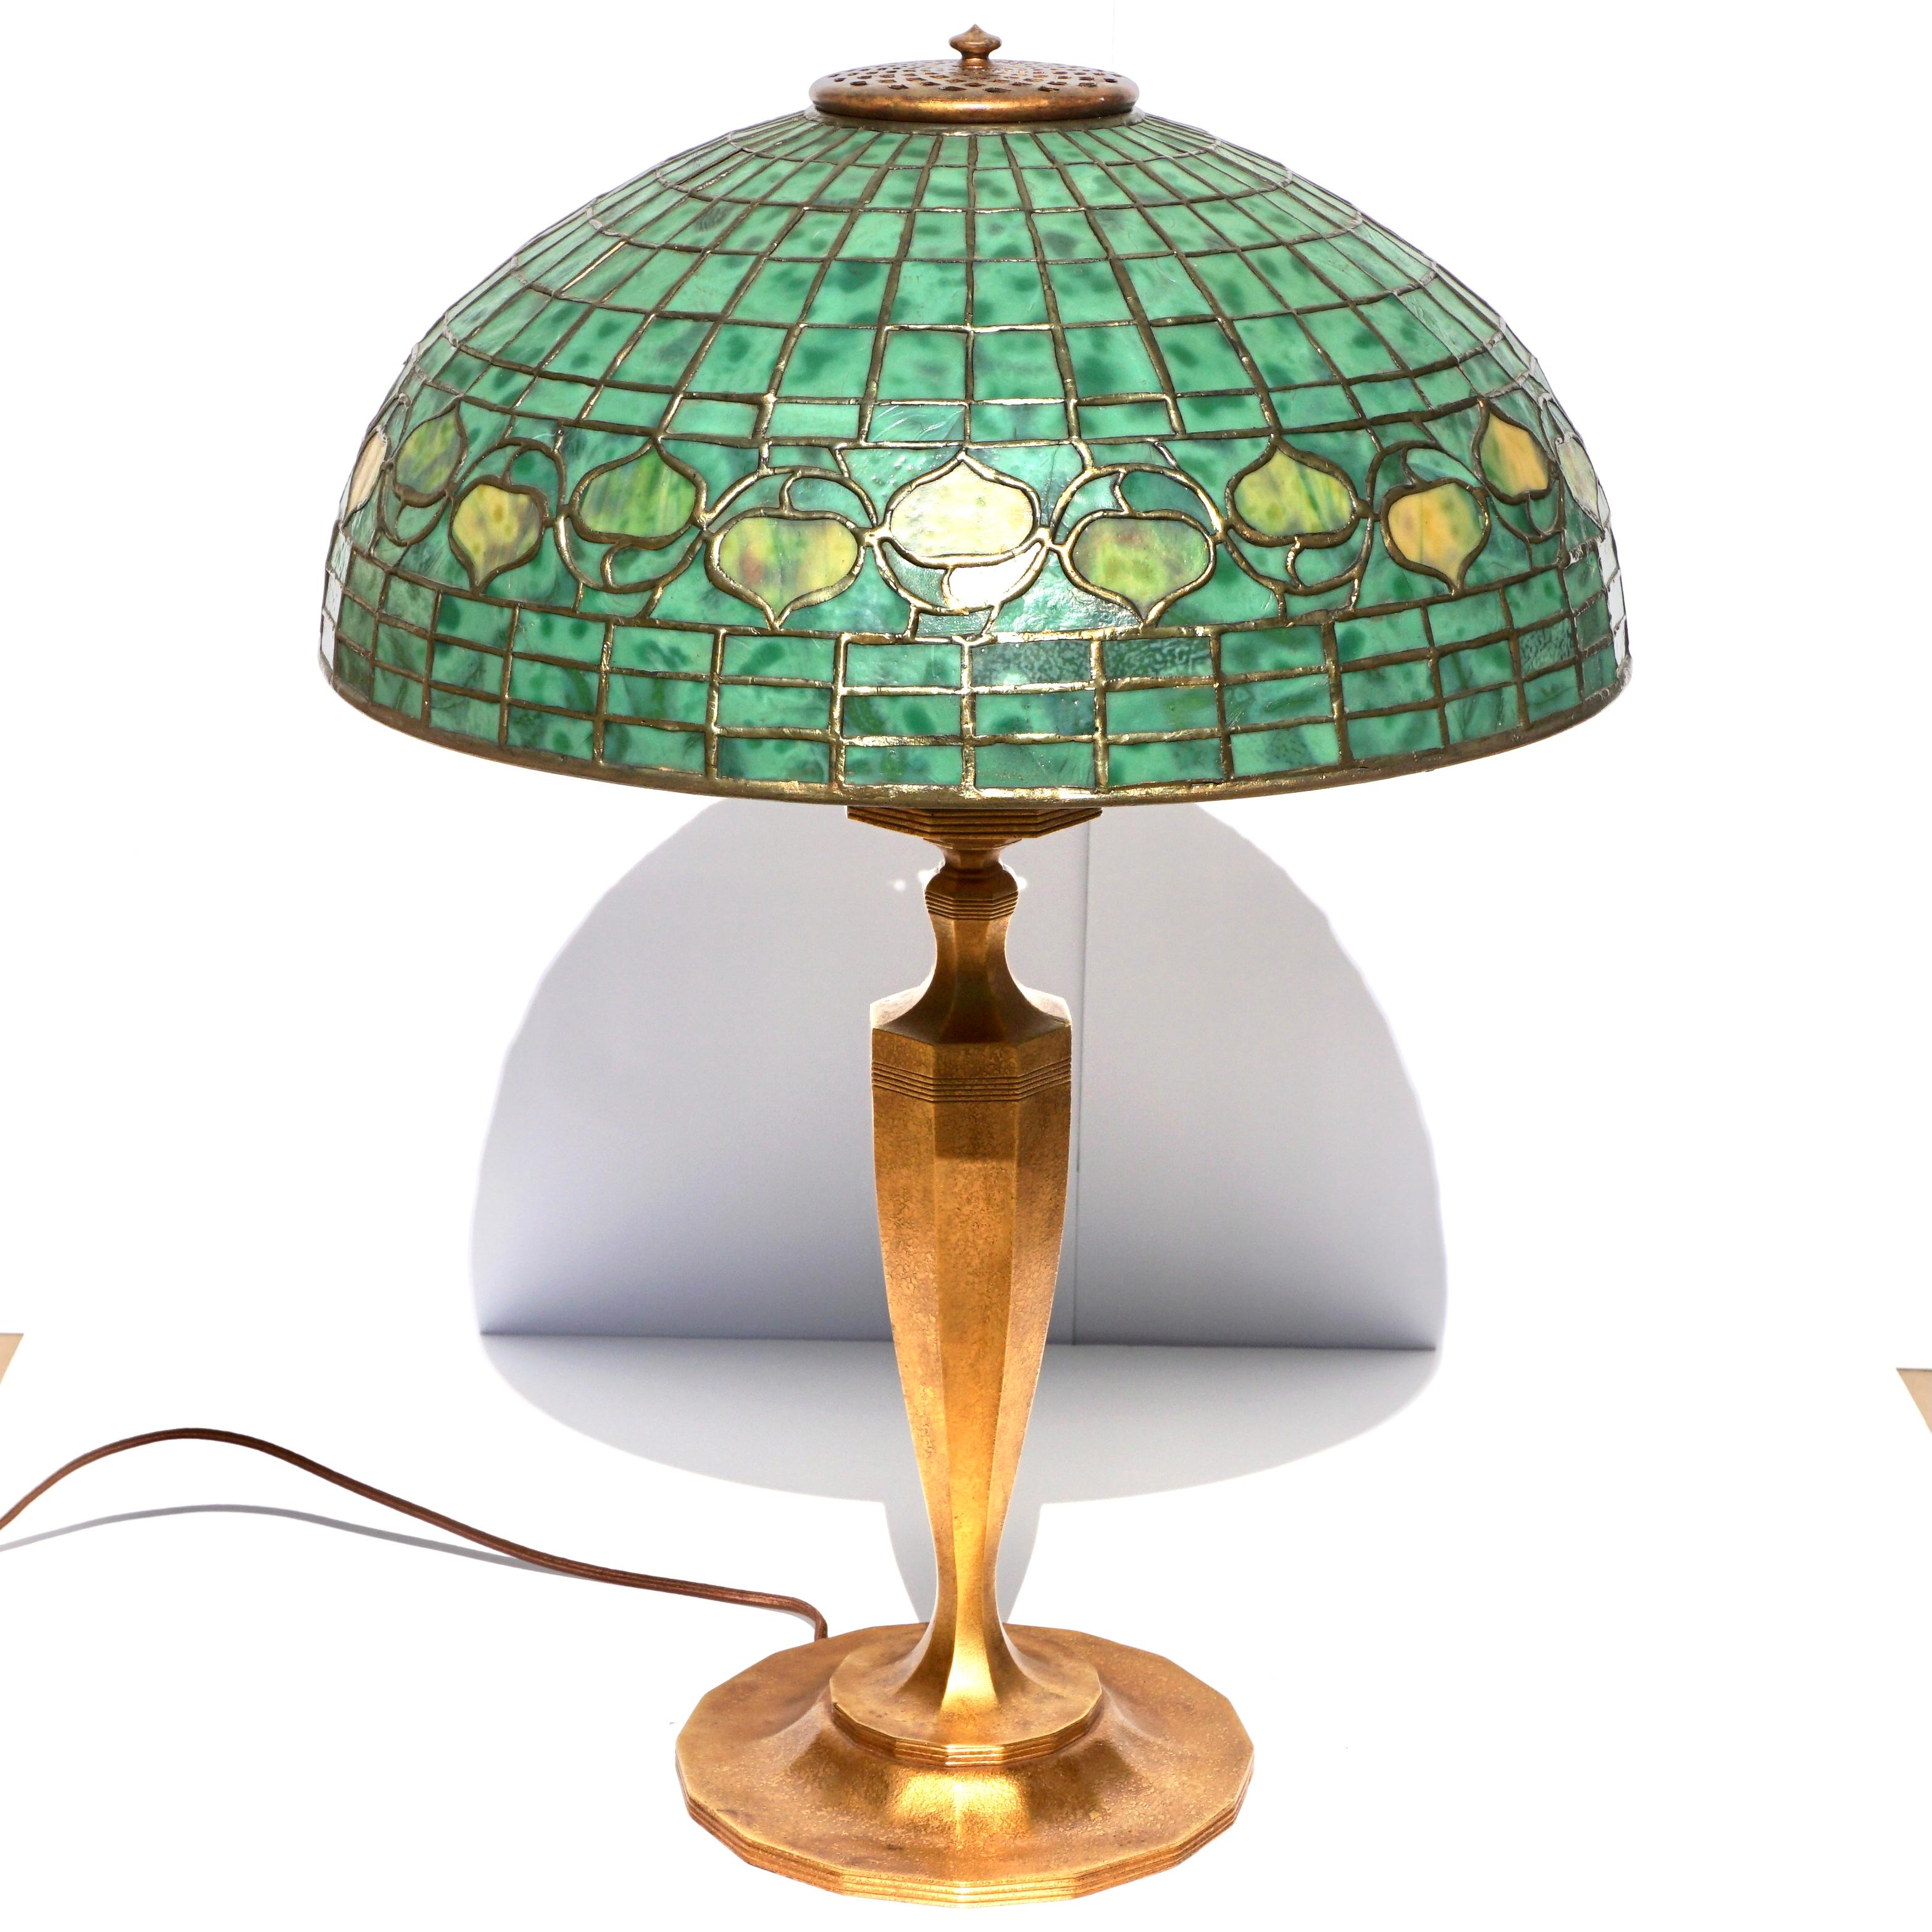 Tiffany studios New York acorn and bronze Art Nouveau table lamp. Circa 1910

A beautiful Tiffany Studios green acorn table lamp in close to perfect condition to grace any room in your house or office. The base is textured in gilt gold with a Art